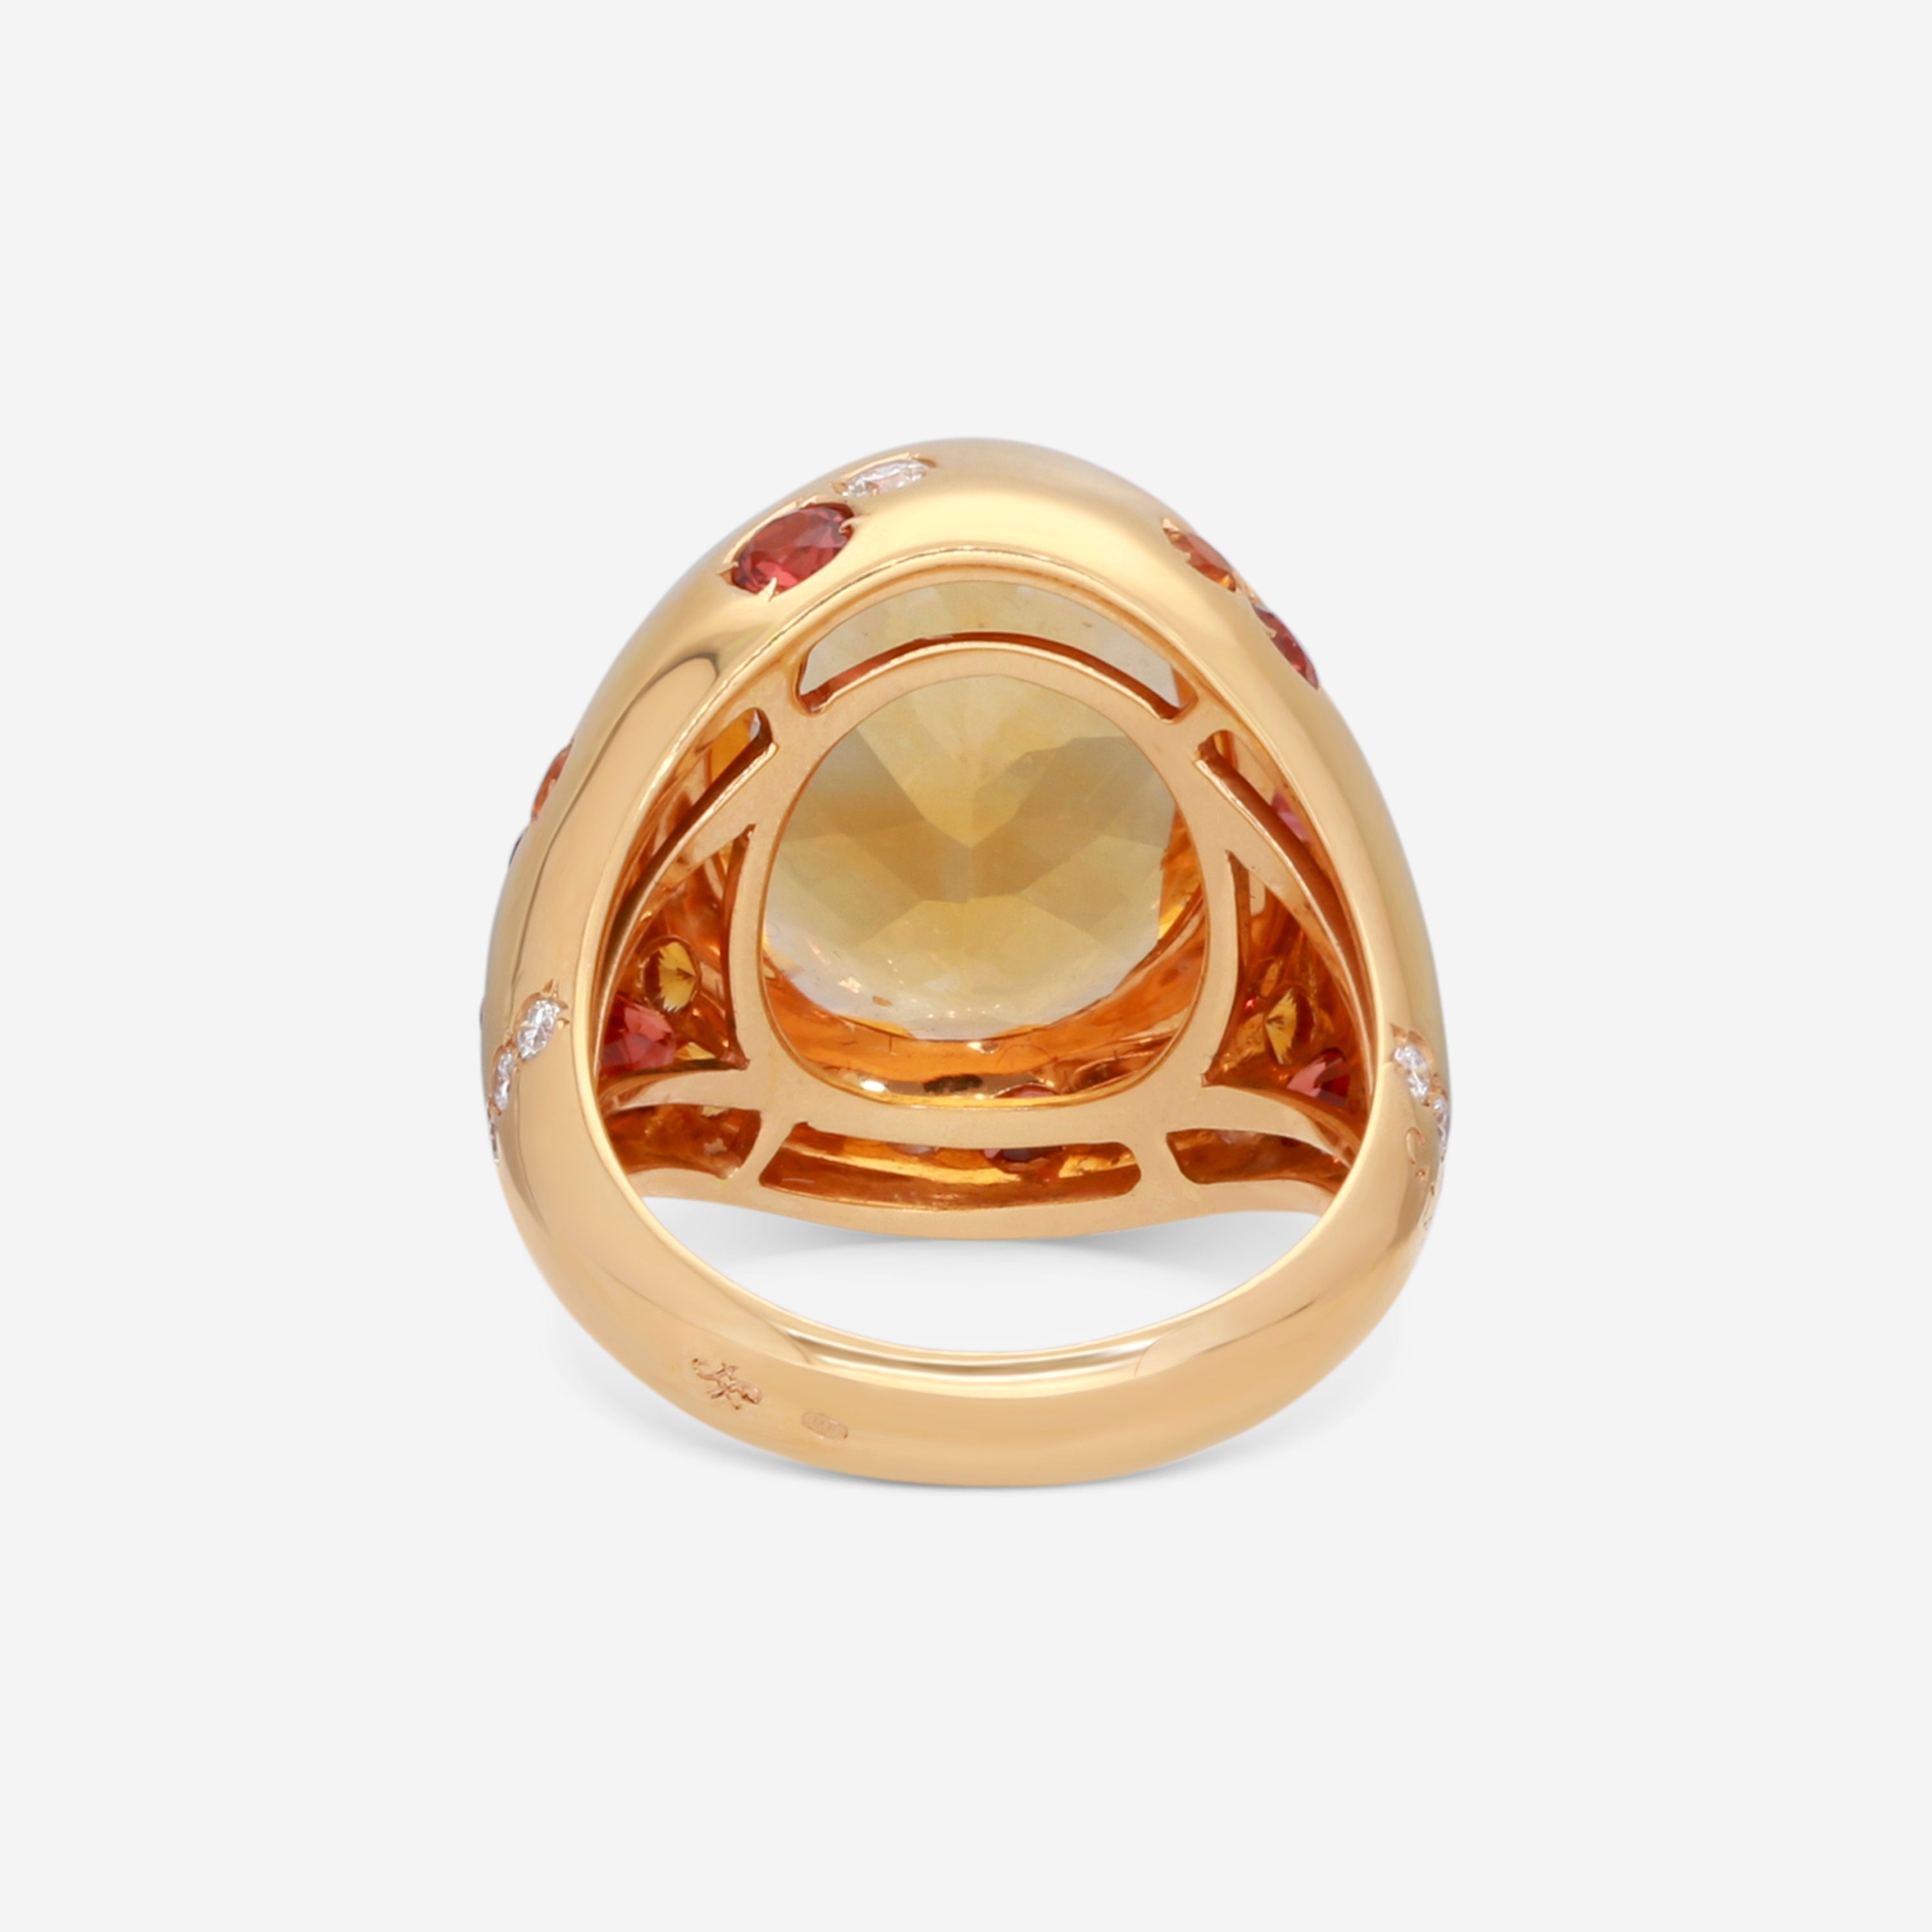 Casato 18K Yellow Gold, Citrine and Diamond Cocktail Ring 104274